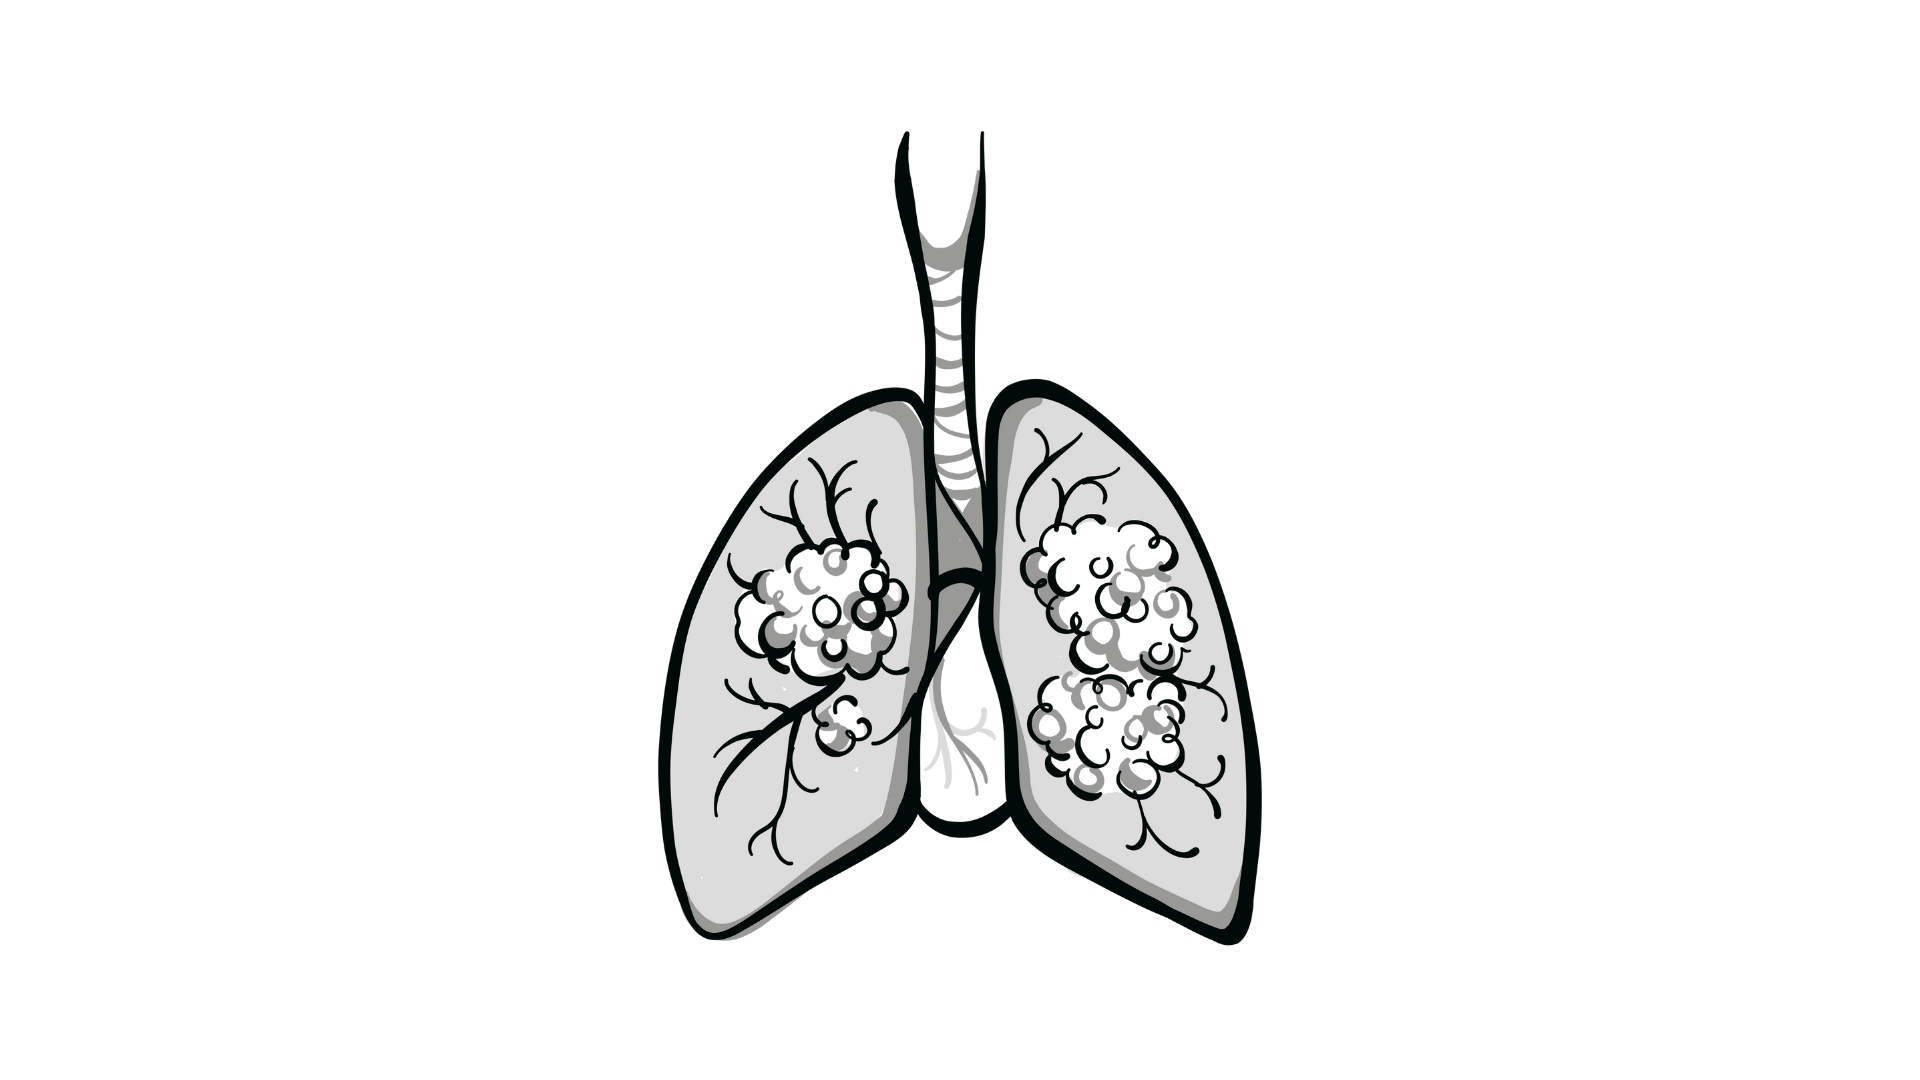 Sugemalimab Demonstrates Clinically Meaningful PFS Boost in Unresectable NSCLC